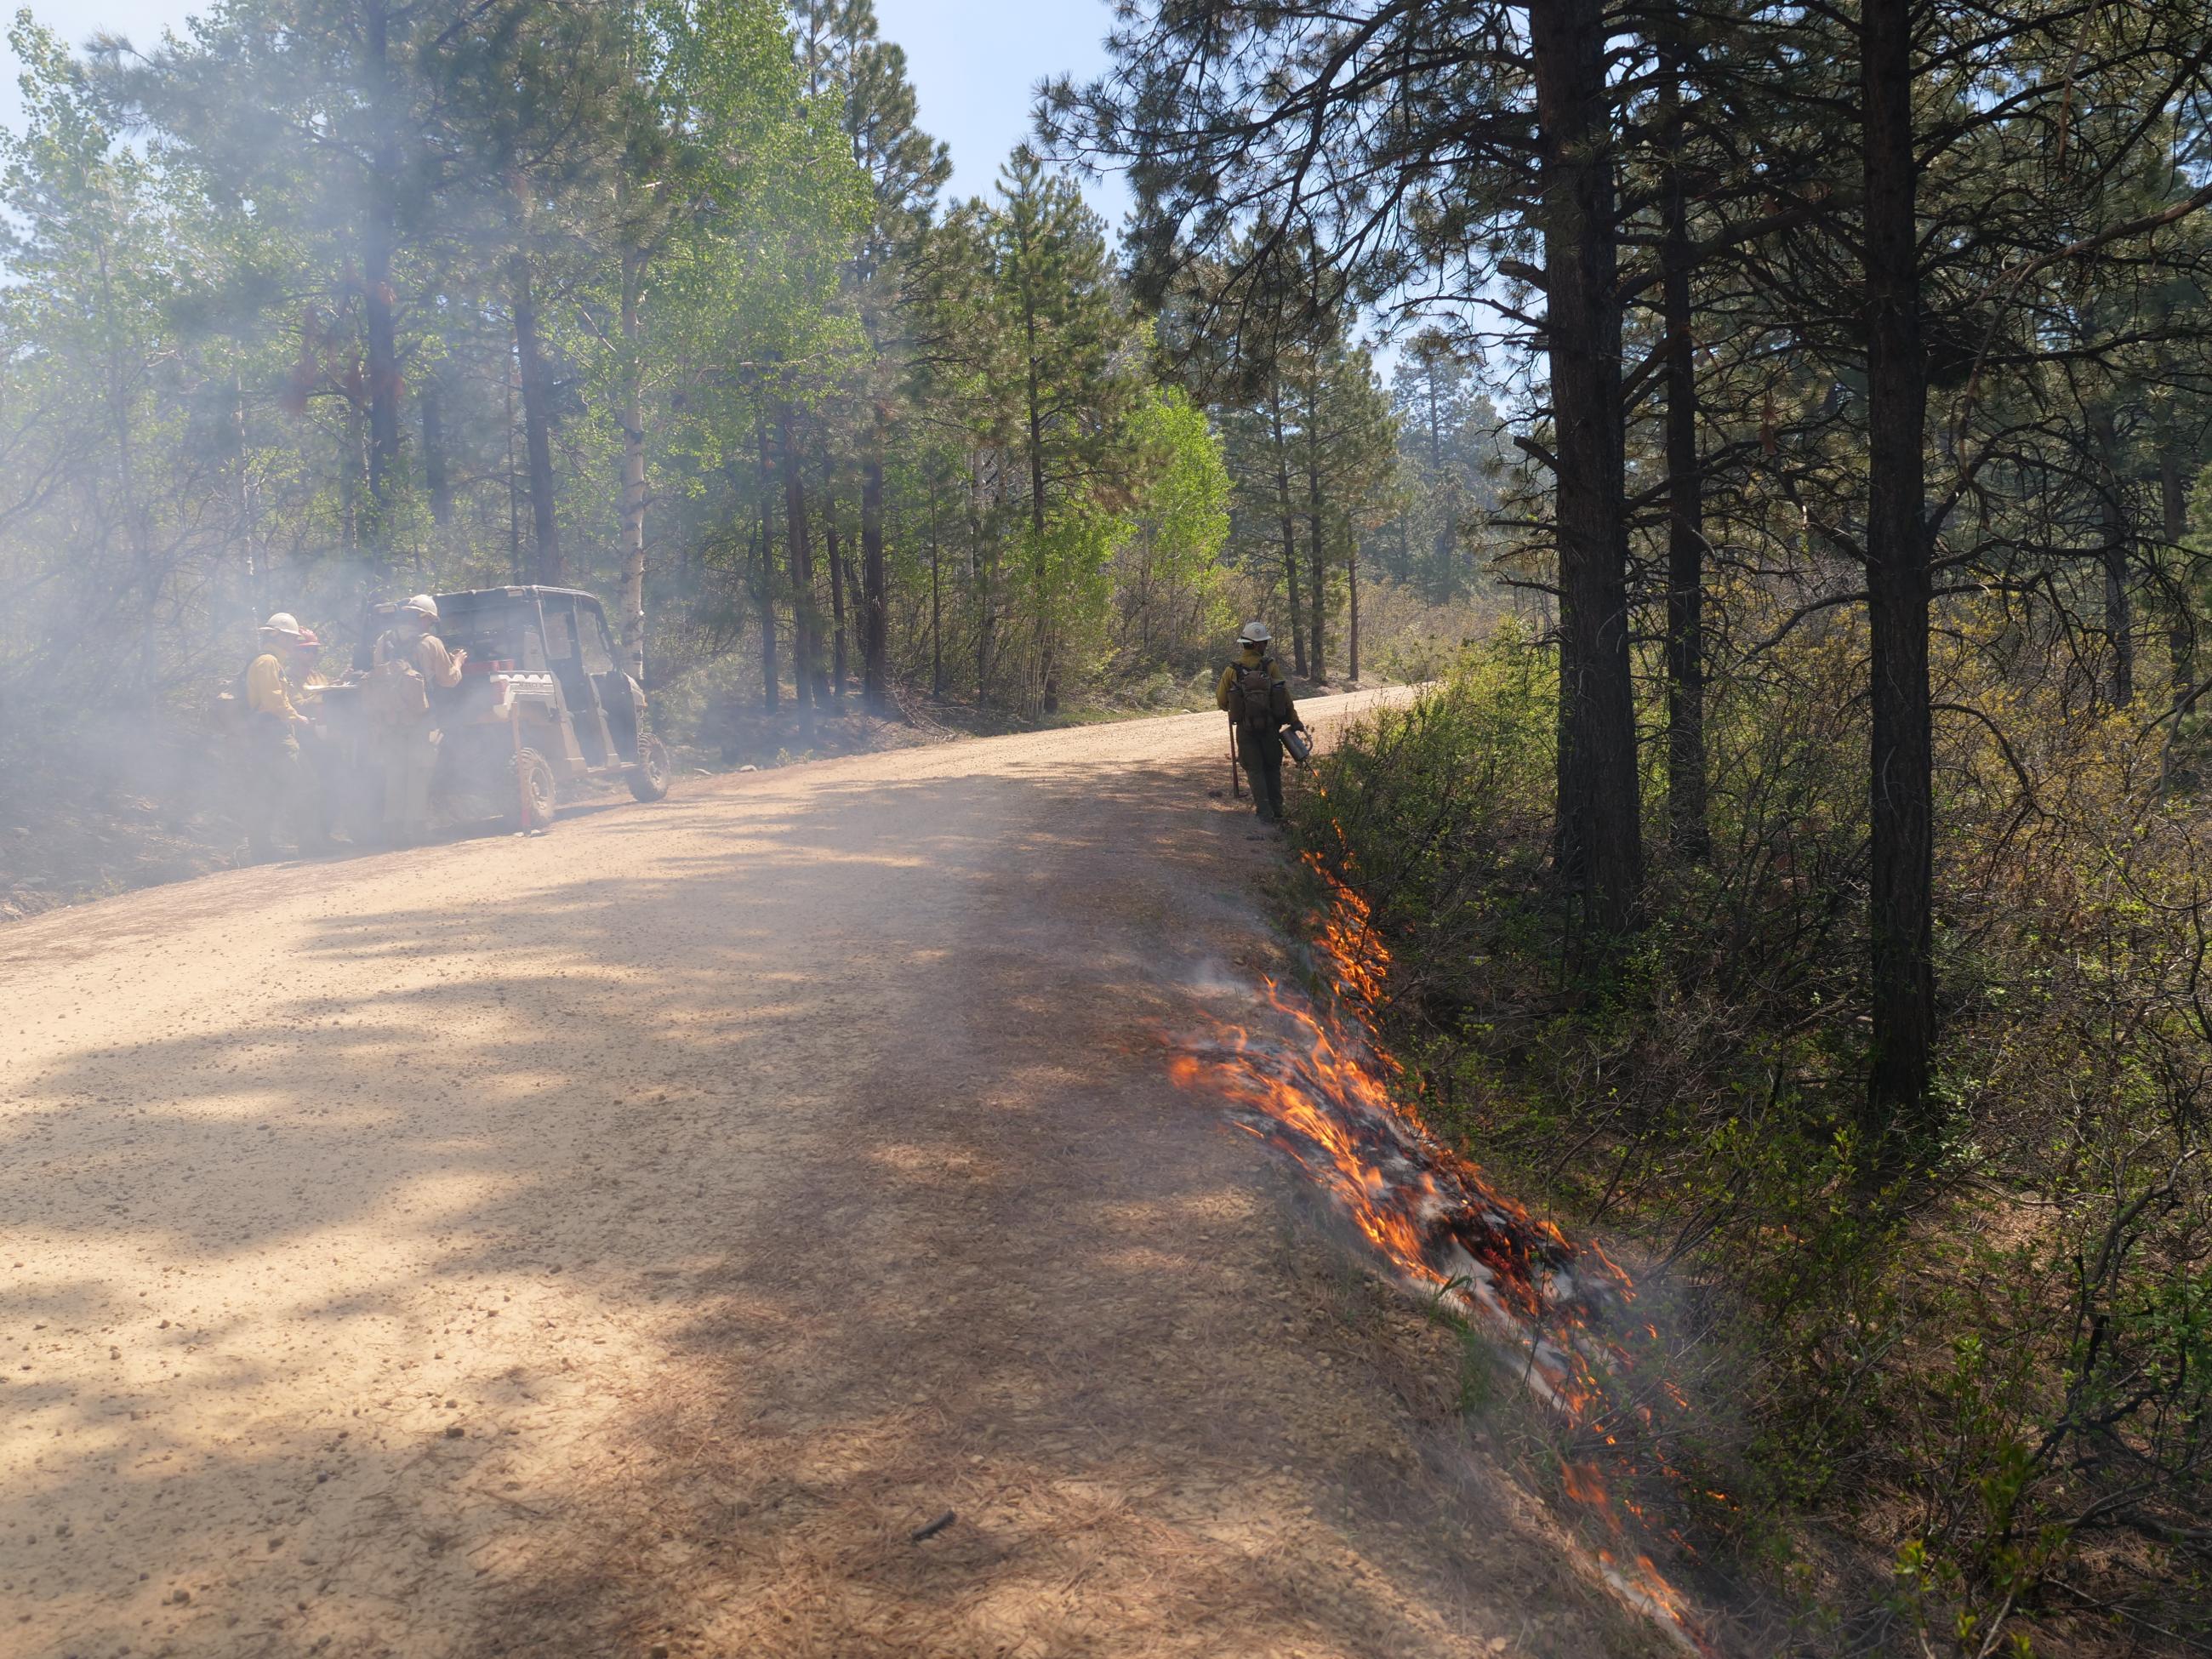 A firefighter with a drip torch applies fire to the ground next to a forest road.